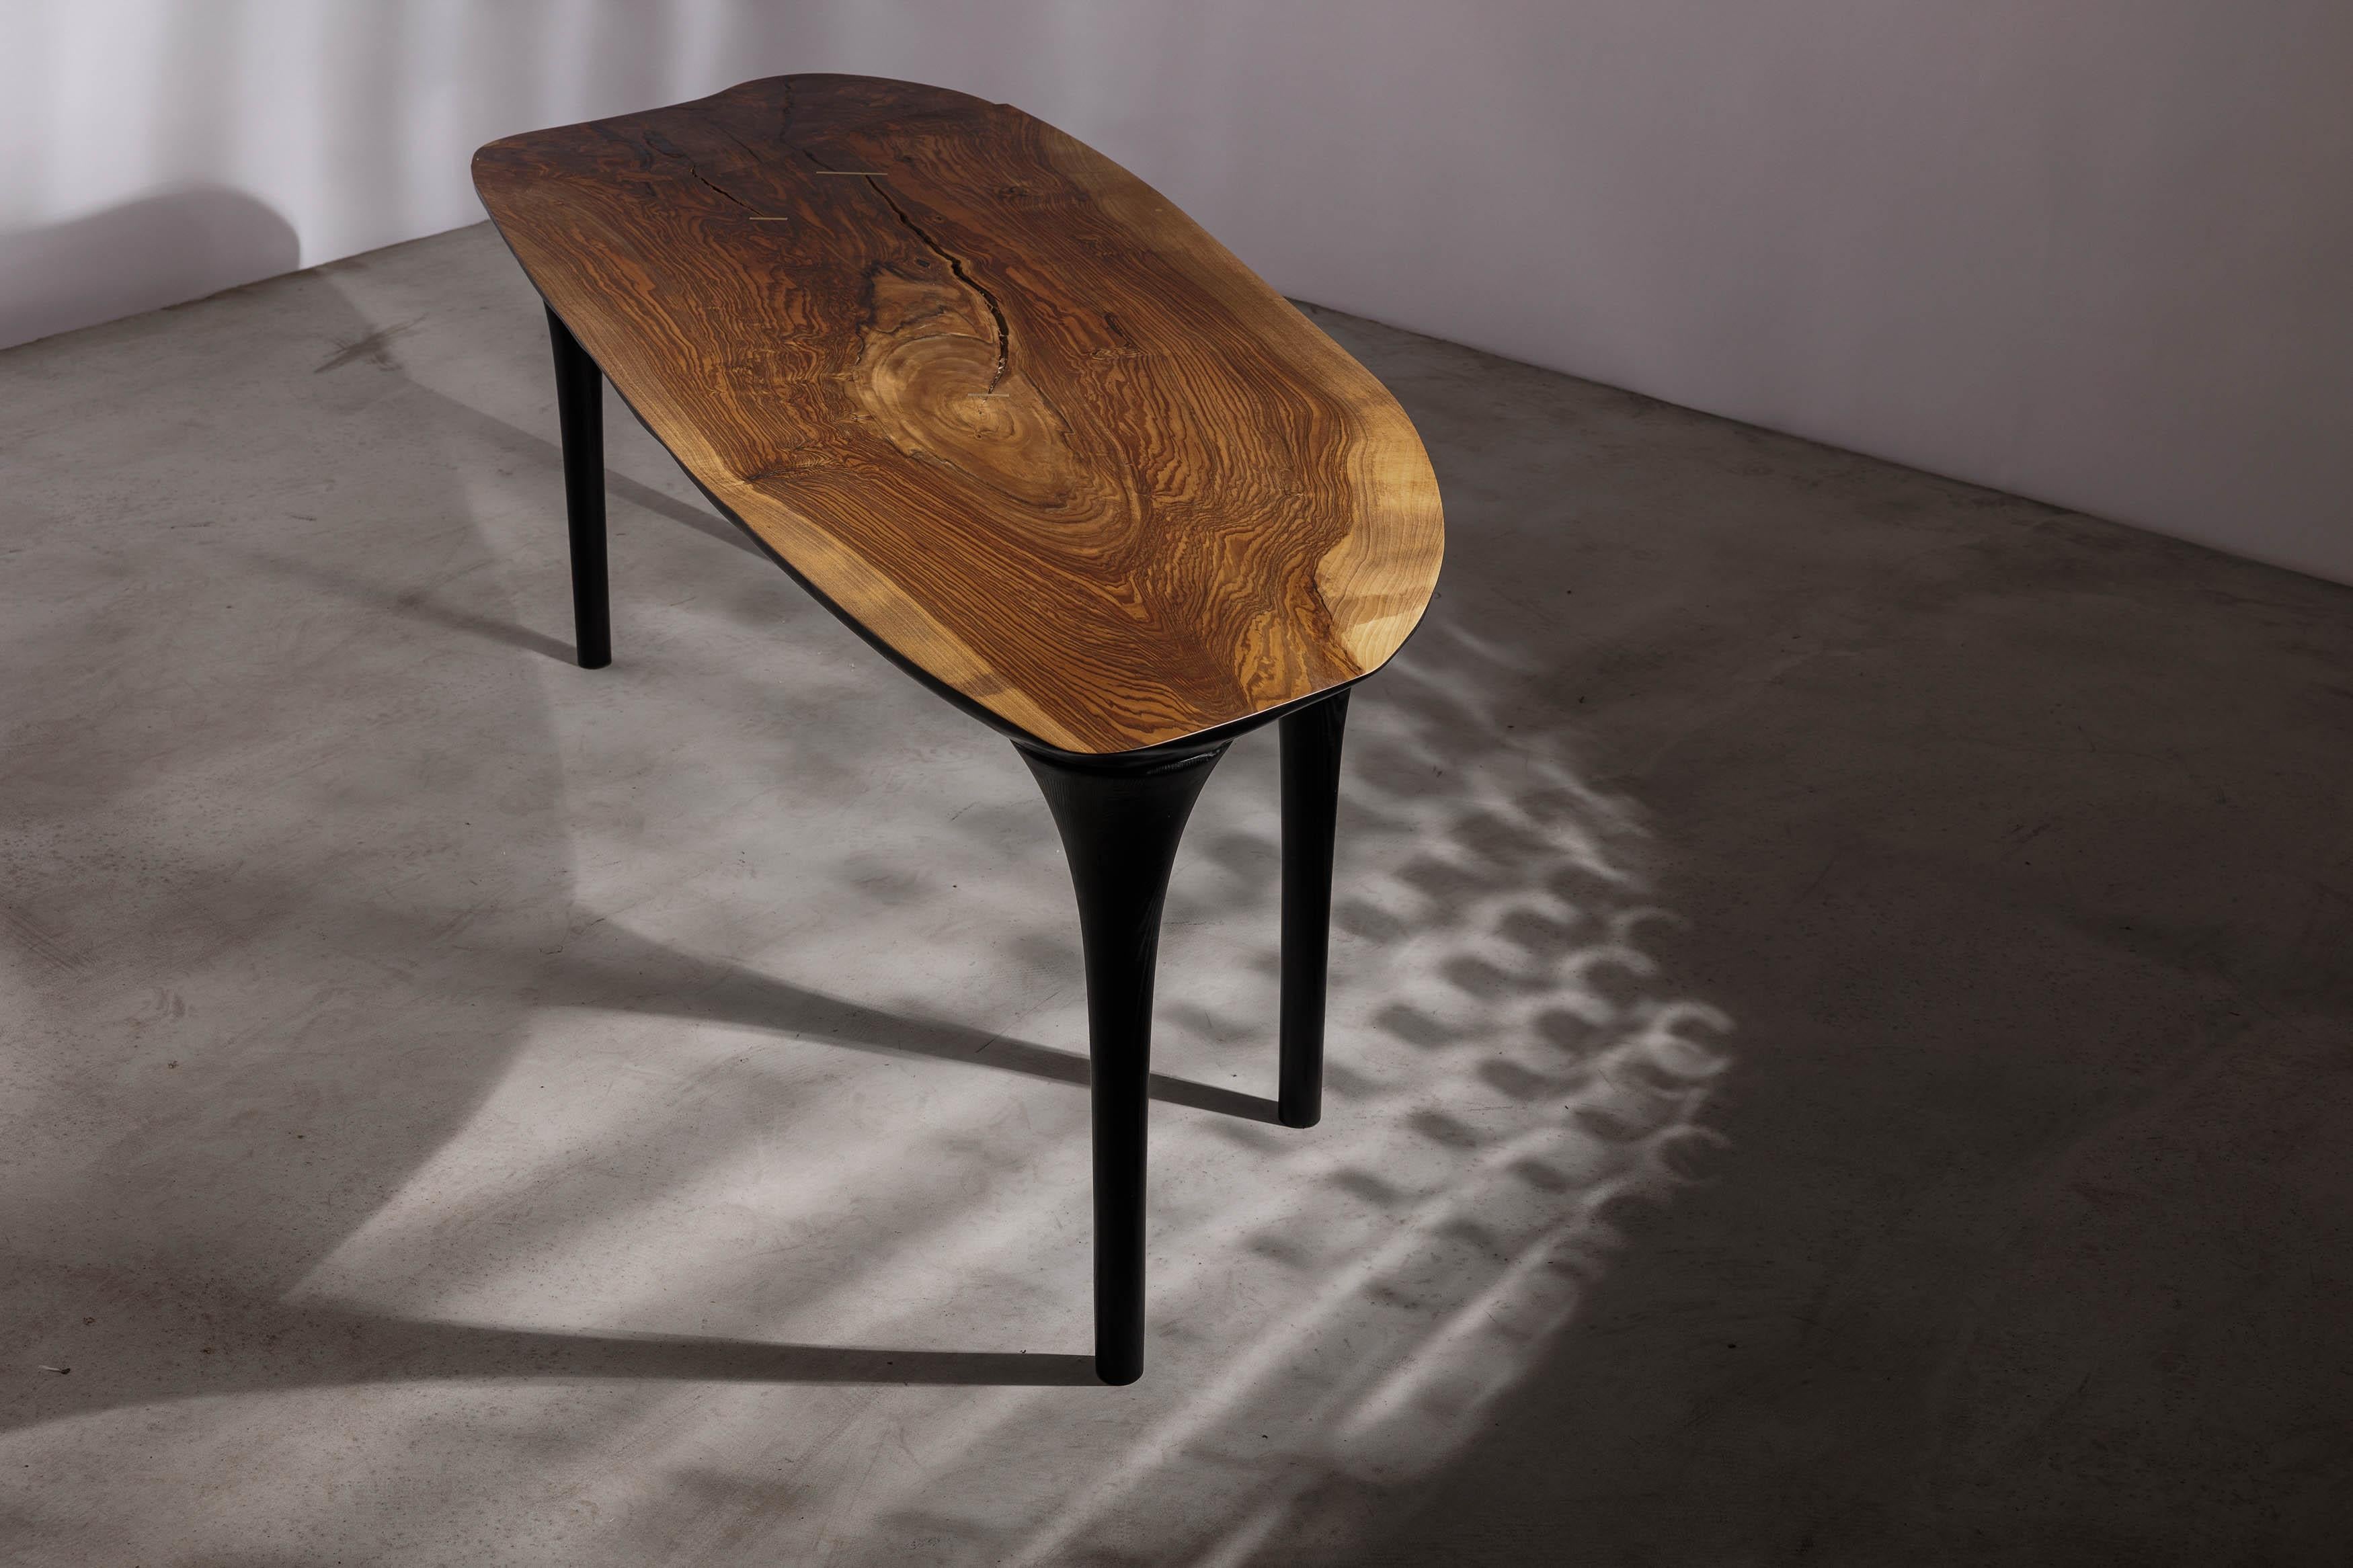 EM211 dning table by Eero Moss
One of a kind
Dimensions; W 240 x D 85 x H 78 cm
Materials: Walnut, ash, India ink.
Finish: Natural oils.

Erosio Collection

This collection is an ode to the fluid, organic shapes found in the natural world.